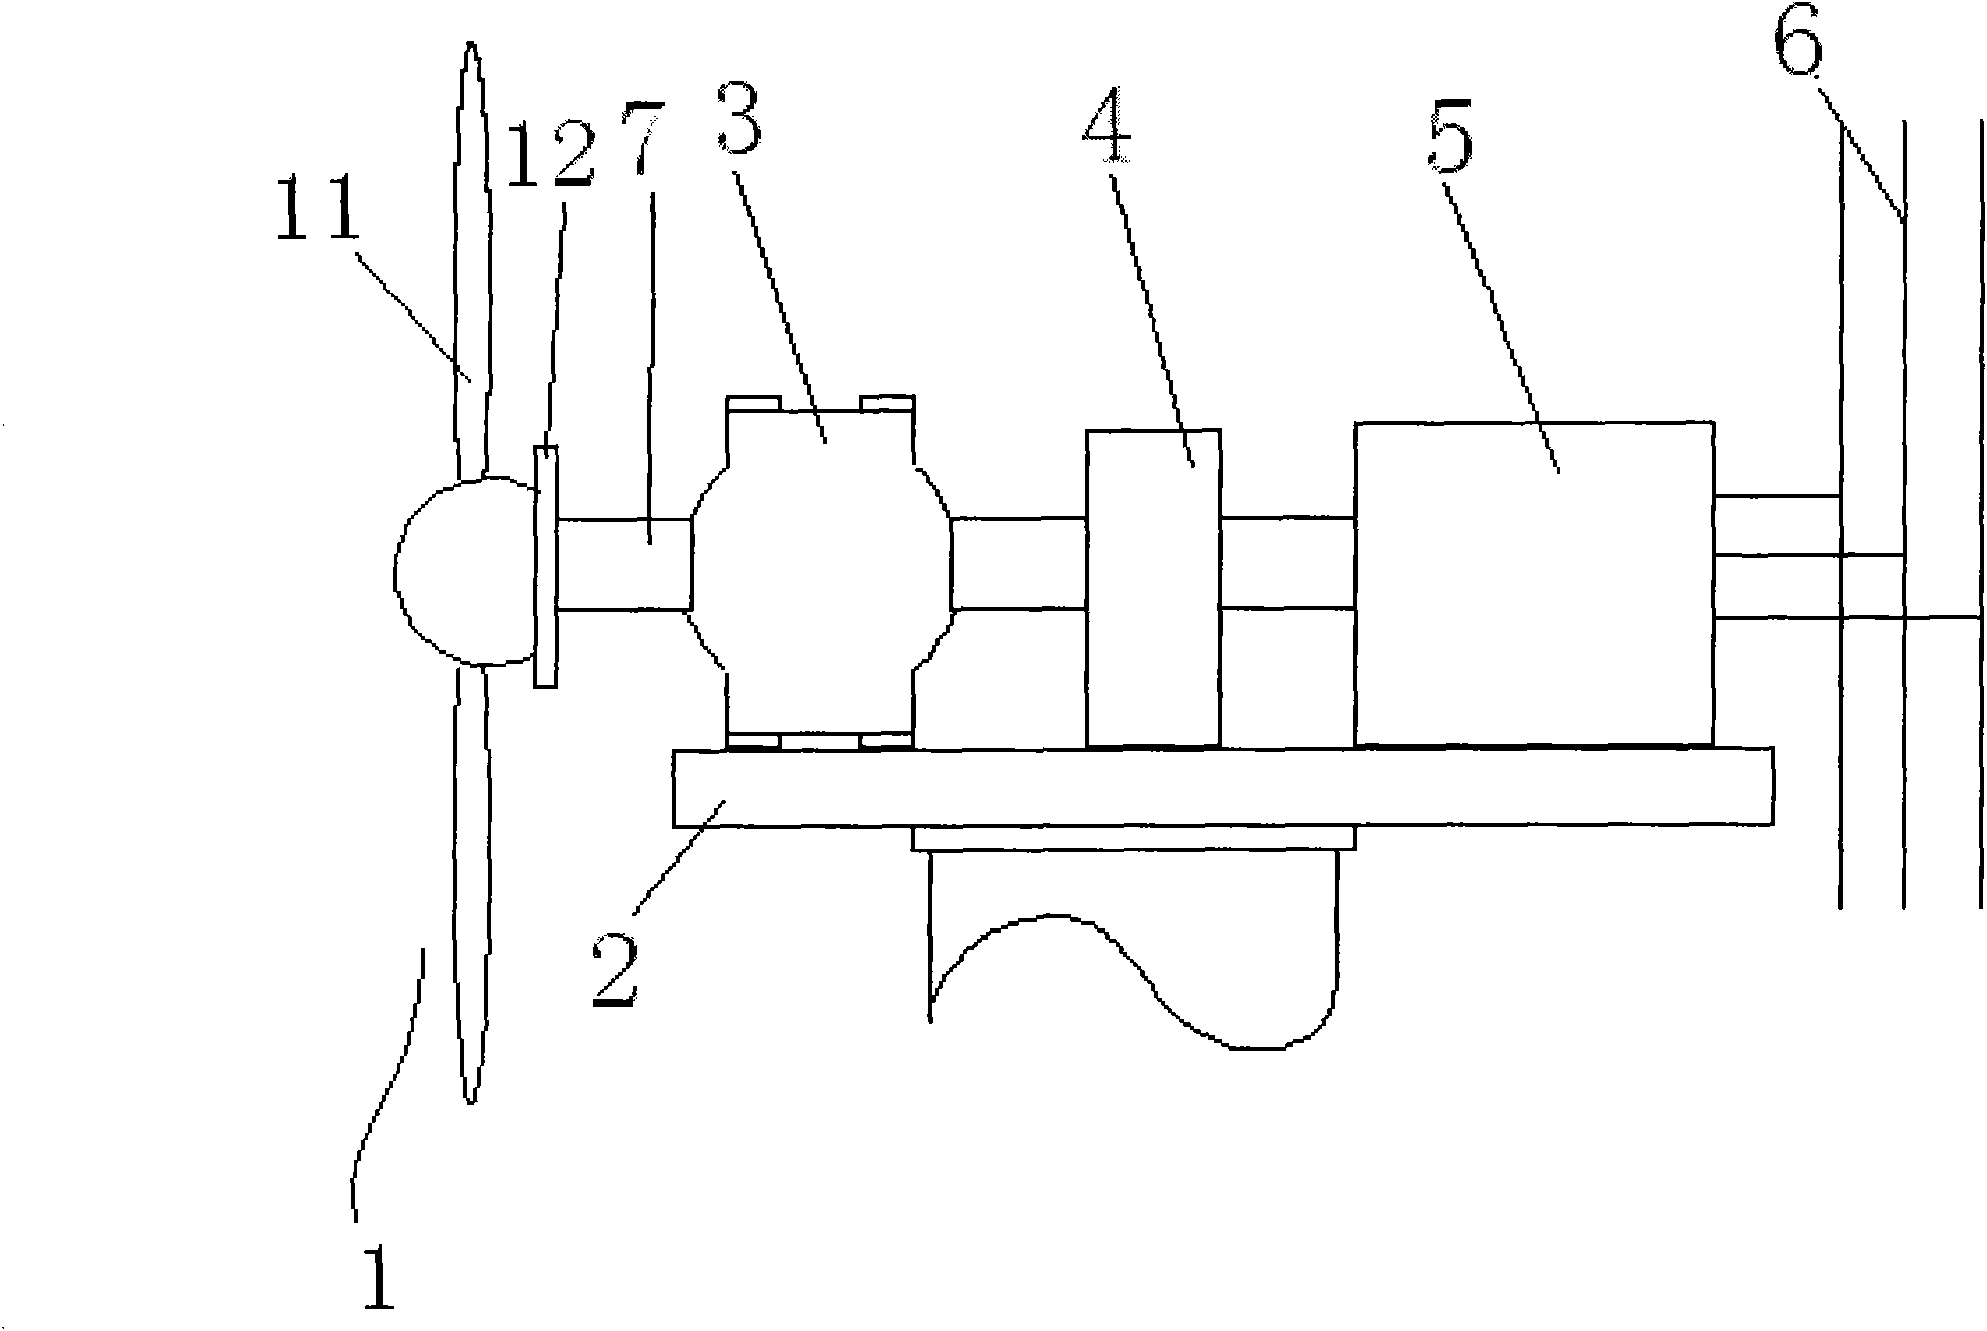 Direct-current excitation synchronous wind generating set